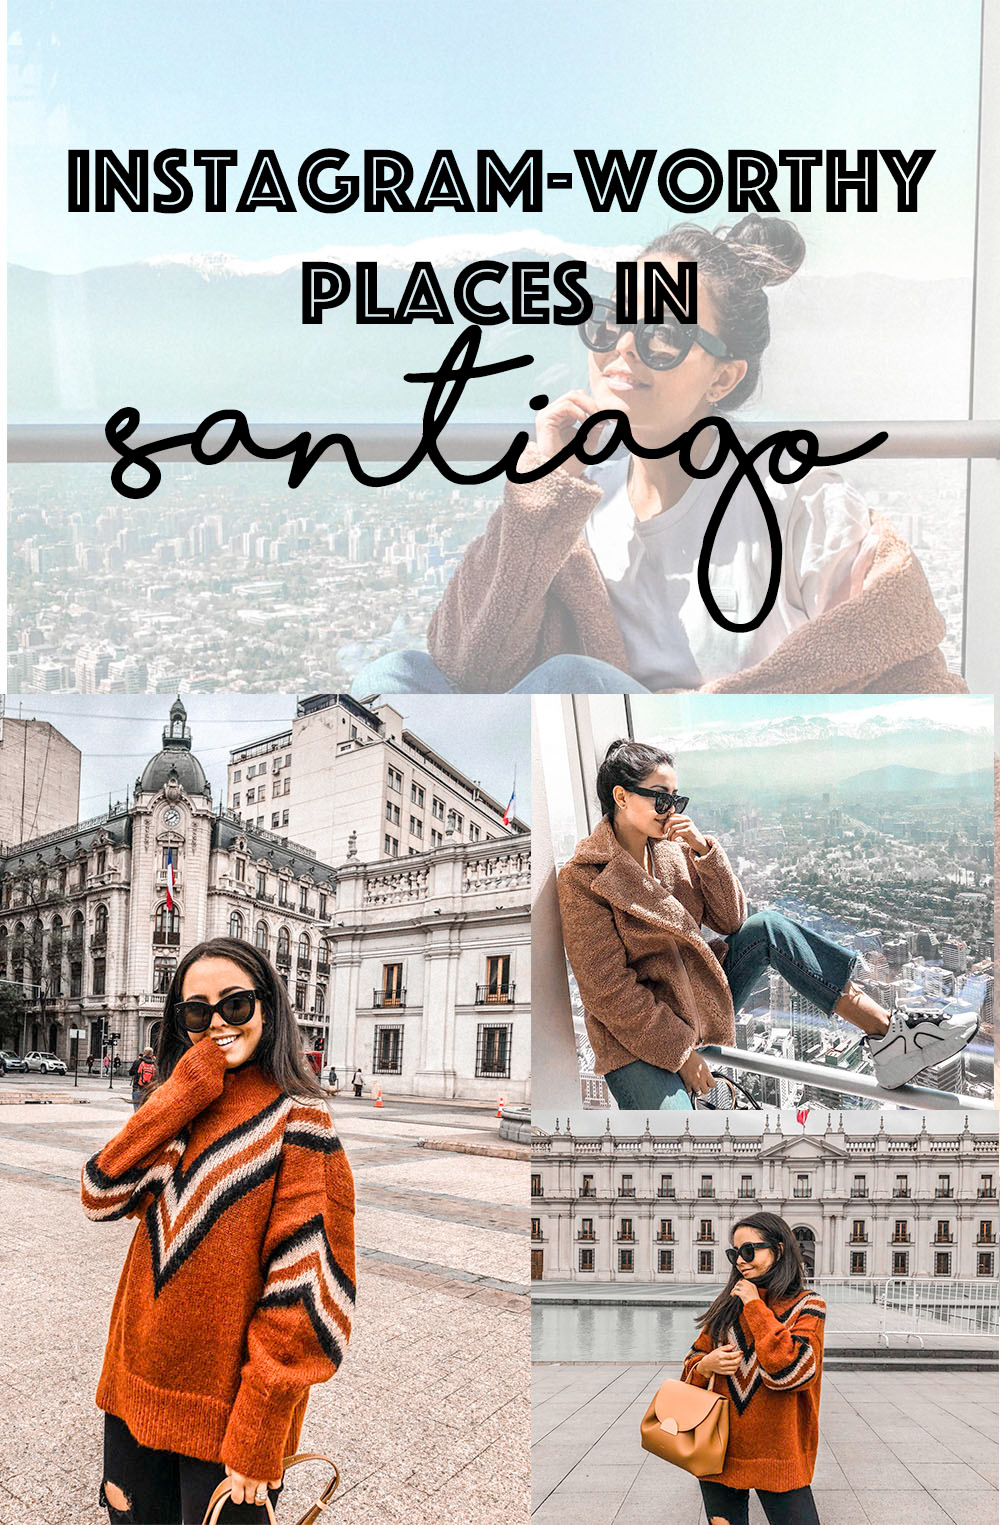 instagram-worthy places in santiago chile